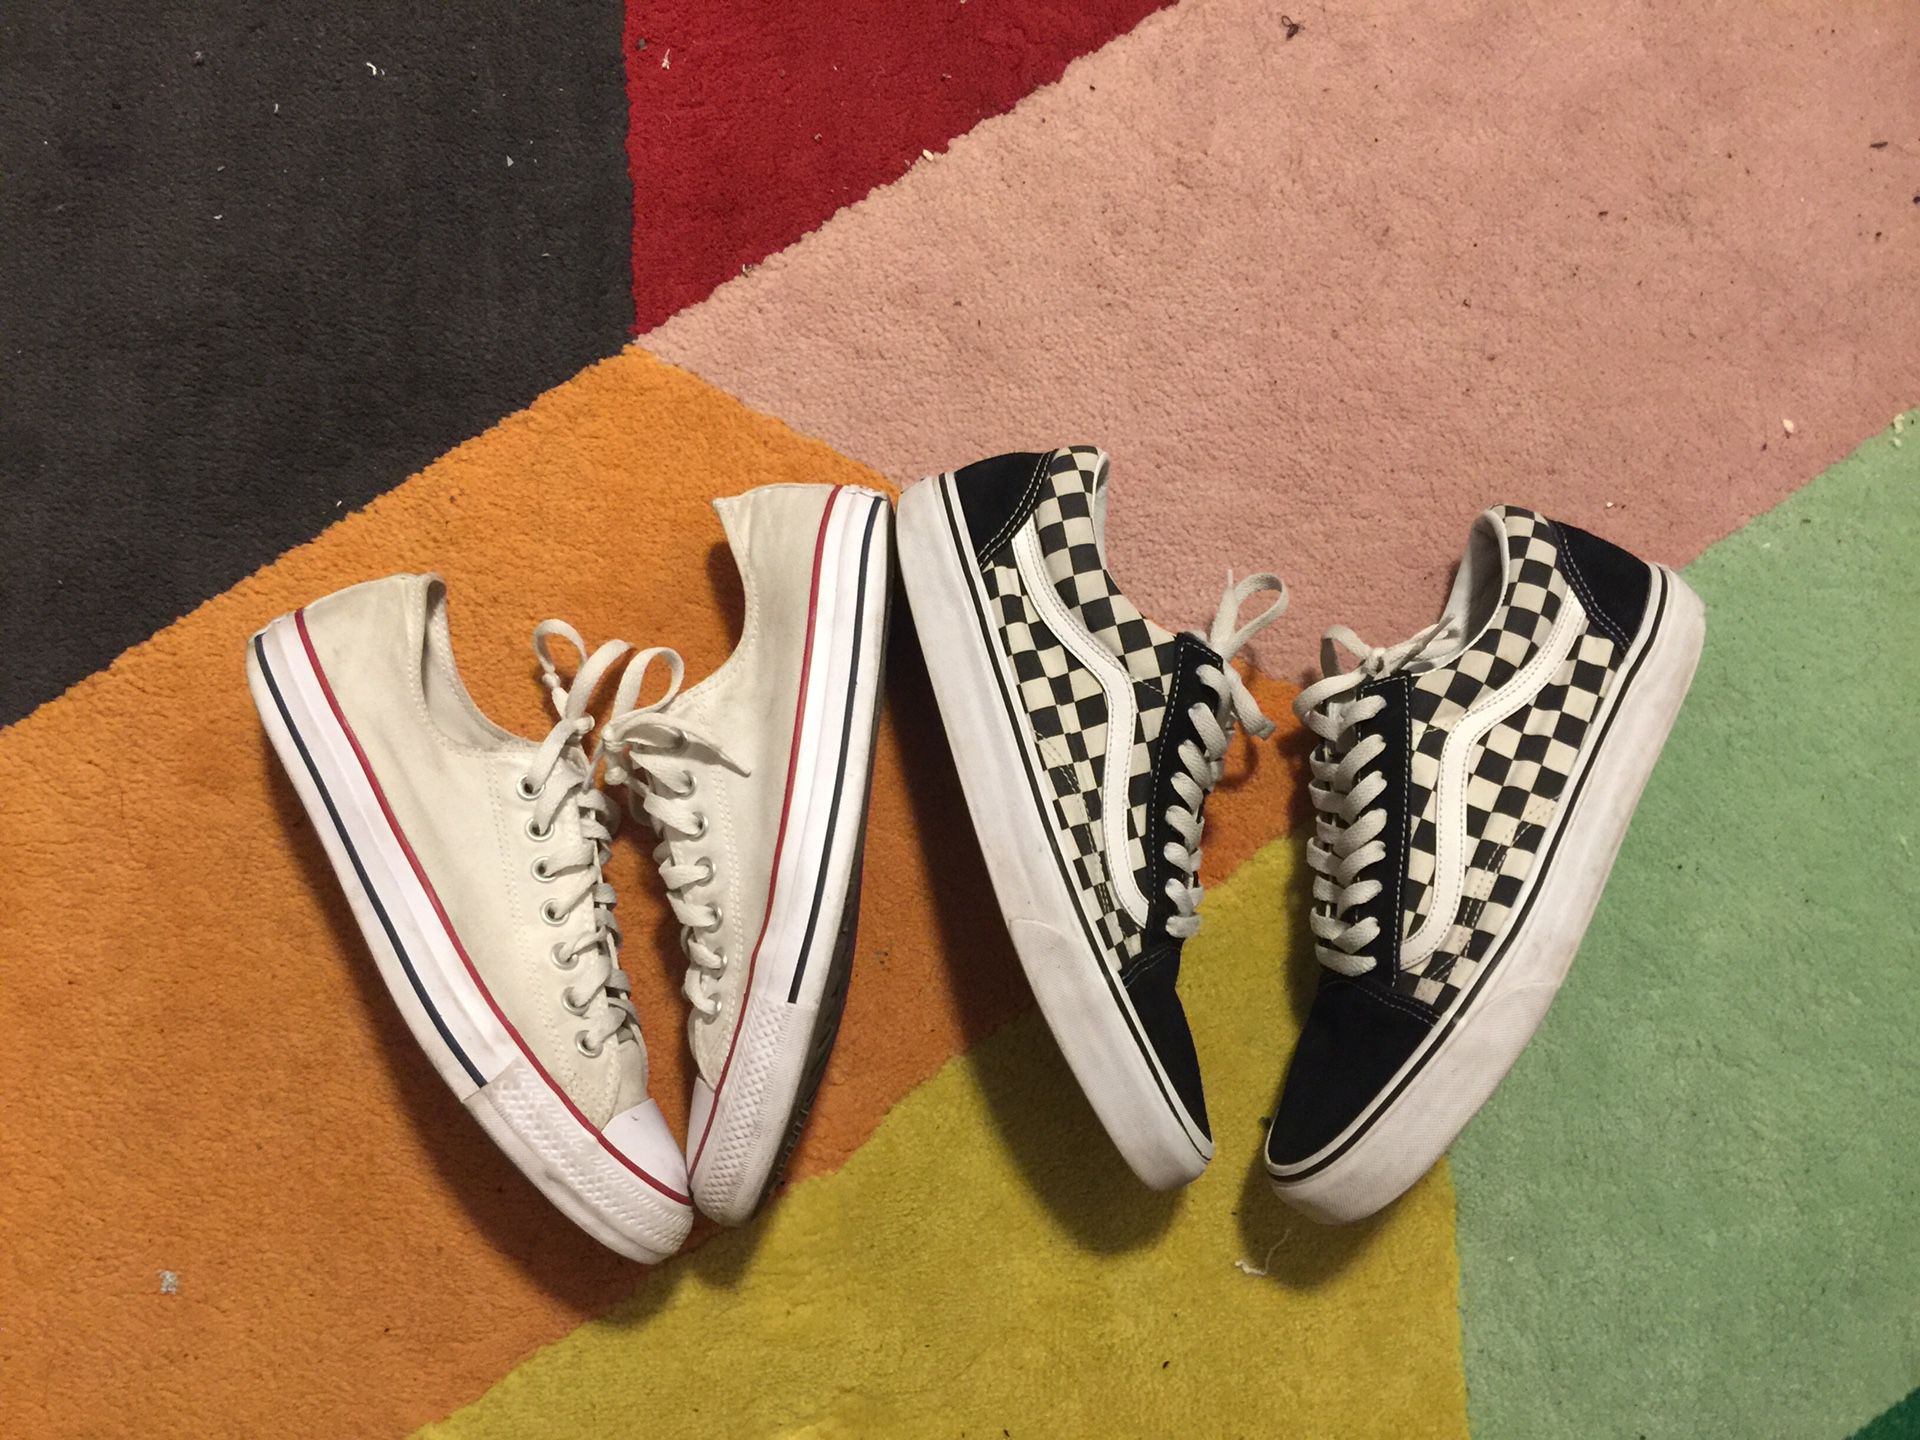 Vans and converse $50 for both